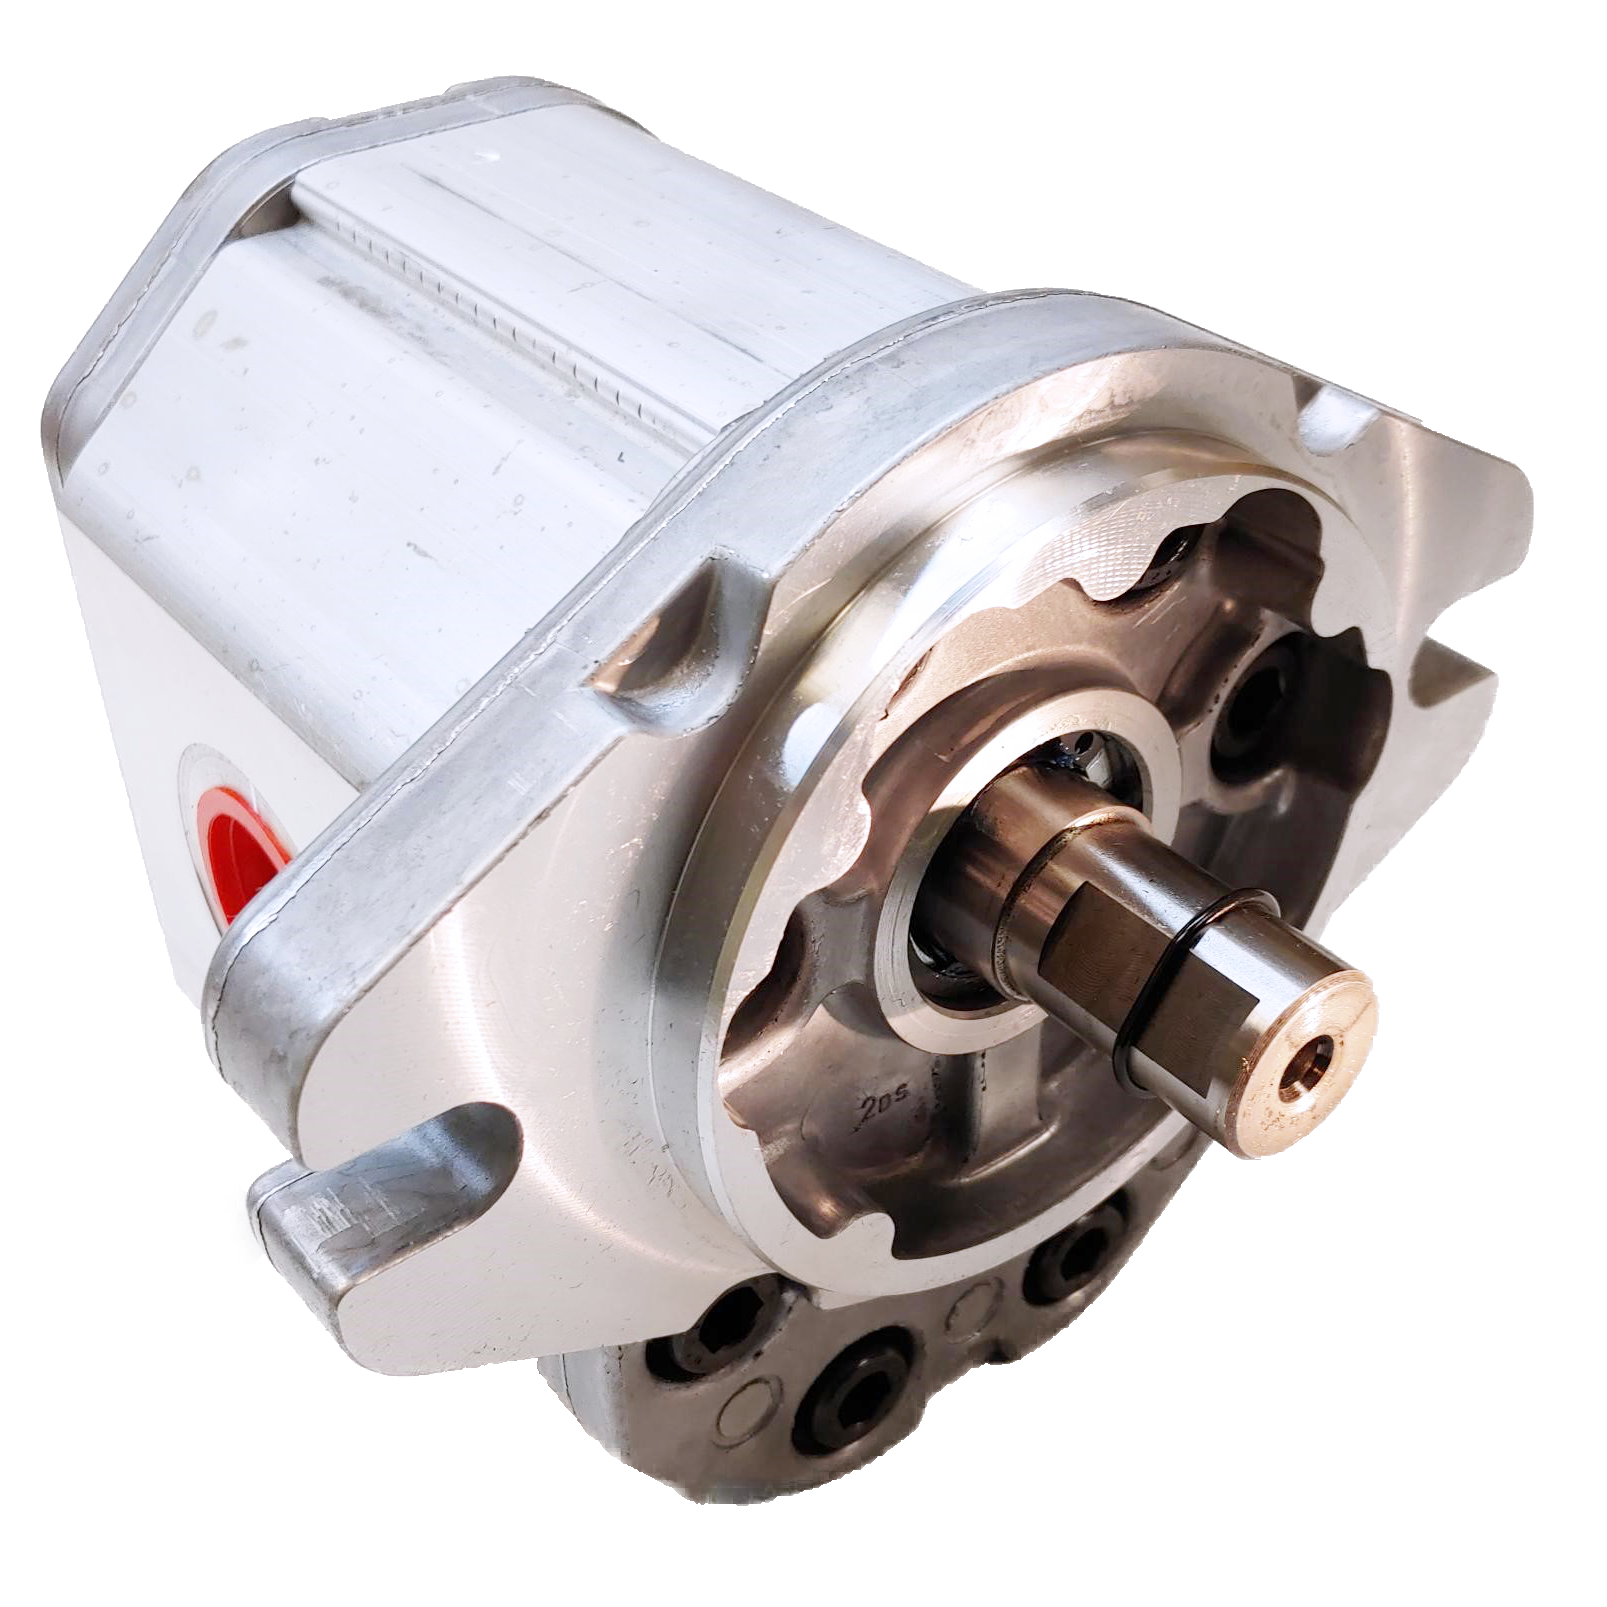 ALM3A-R-80-E4 : Marzocchi Gear Motor, Bidirectional, 52cc, 2900psi rated, 2500RPM, 1" Code 61 ports, 5/8" Bore x 5/32" Keyed Shaft